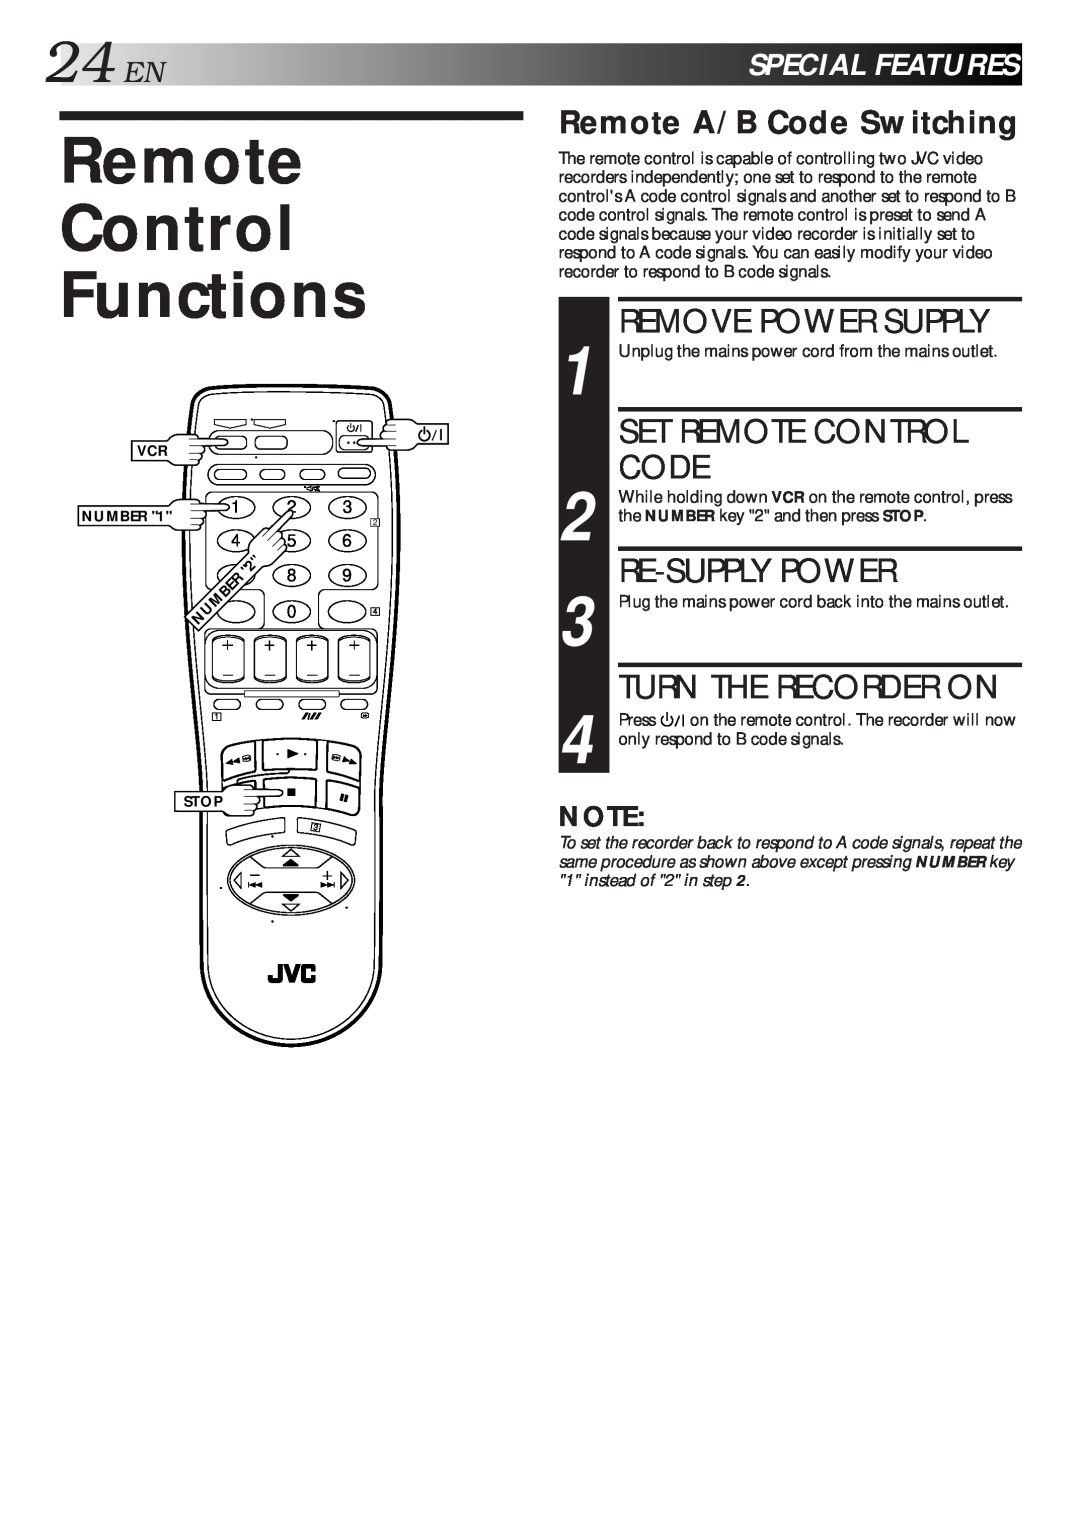 JVC HR-J461MS Remote Control Functions, Remove Power Supply, Set Remote Control Code, Re-Supply Power, 24ENSPECIALFEATURES 